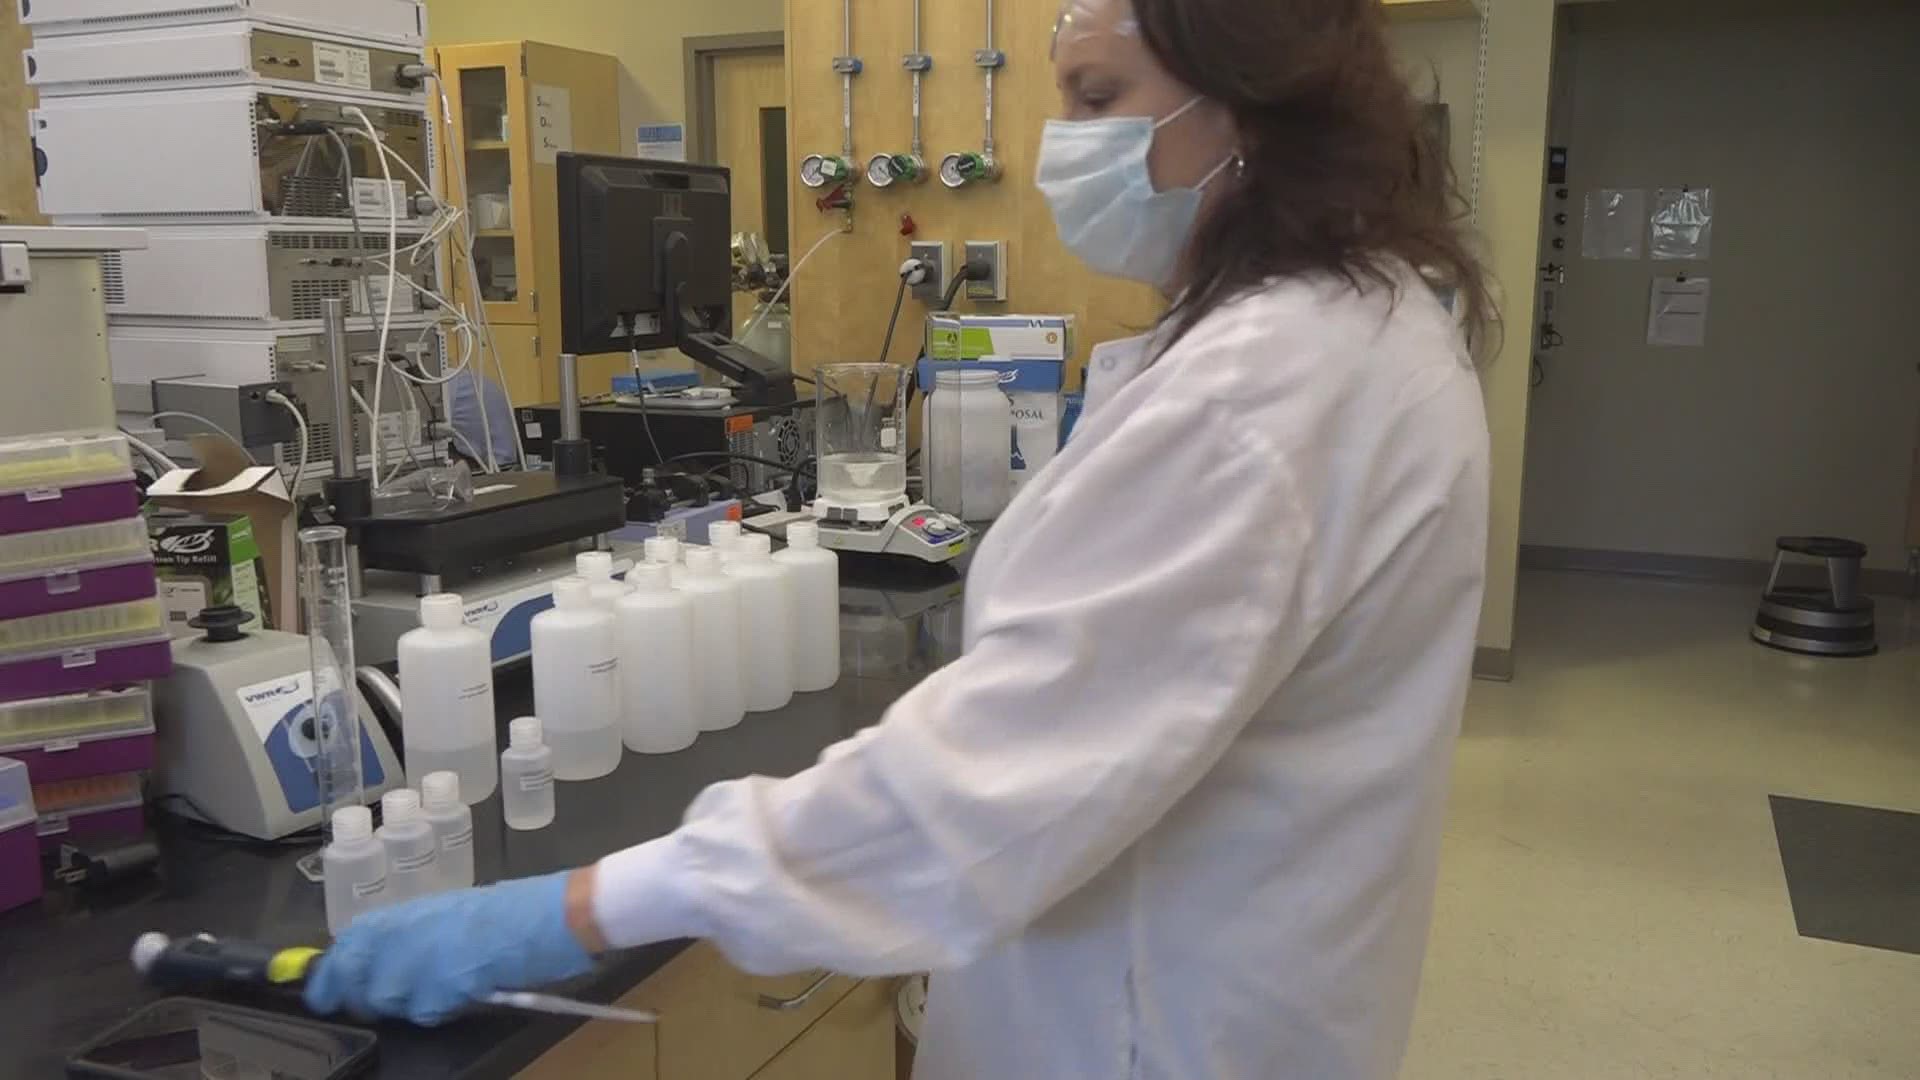 As Maine faces a shortage of 'fit test solution,' a chemical compound used to determine if an N-95 mask fits properly, UNE researchers step up to fill demand.